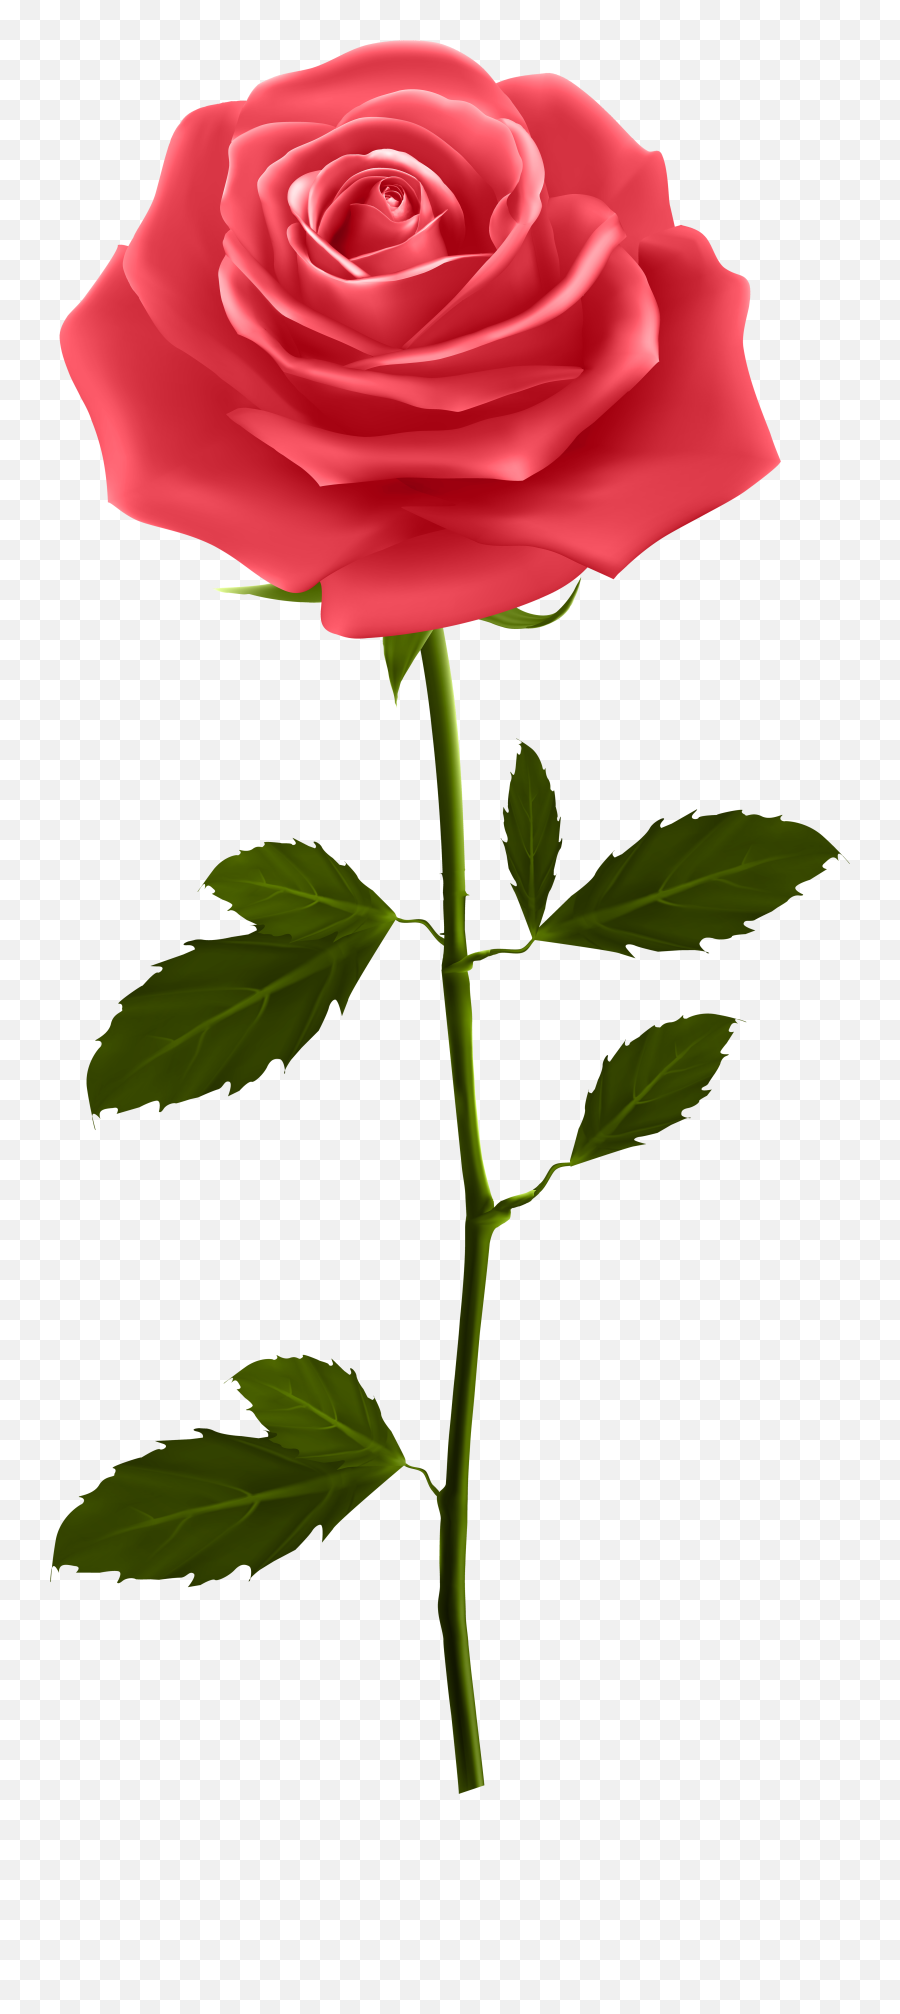 Real Rose With Stem Clipart Png